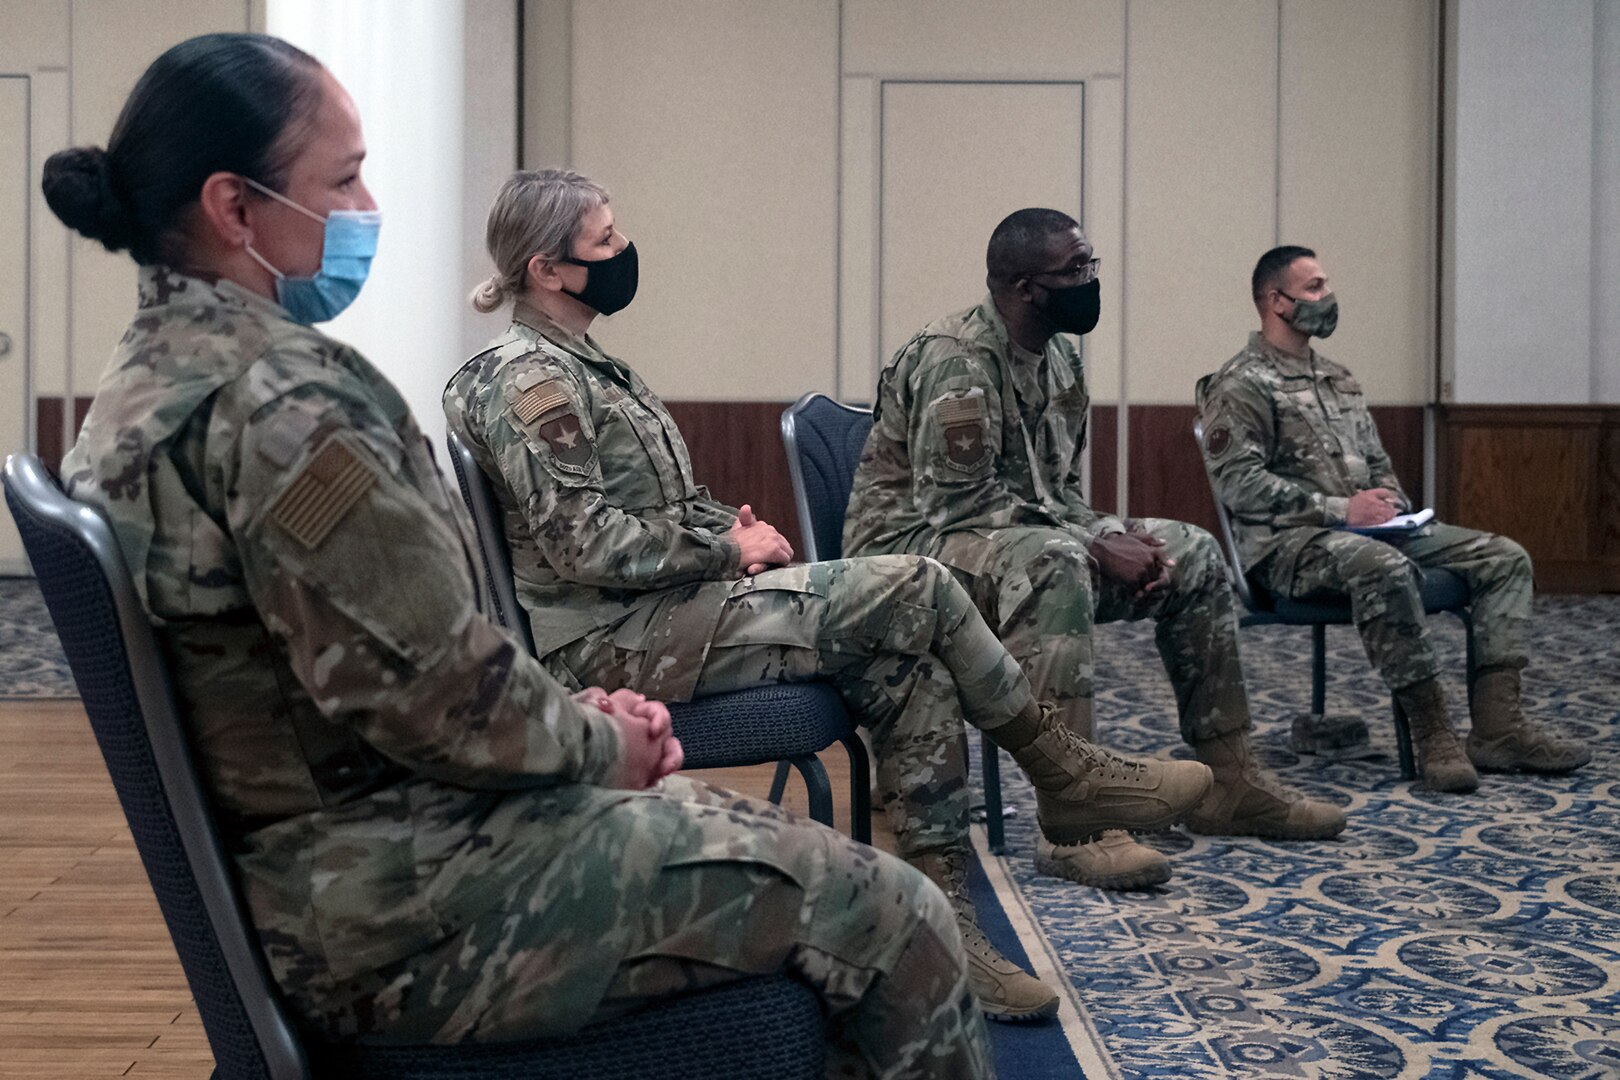 Brig. Gen. Caroline Miller, 502nd Air Base Wing and JBSA wing commander, and Command Chief Master Sgt. Wendell Snider met with a group of Airman and civilian employees to discuss “Unconscious Bias” during the command’s Tough Conversation Roundtable at Joint Base San Antonio-Randolph Aug. 25.